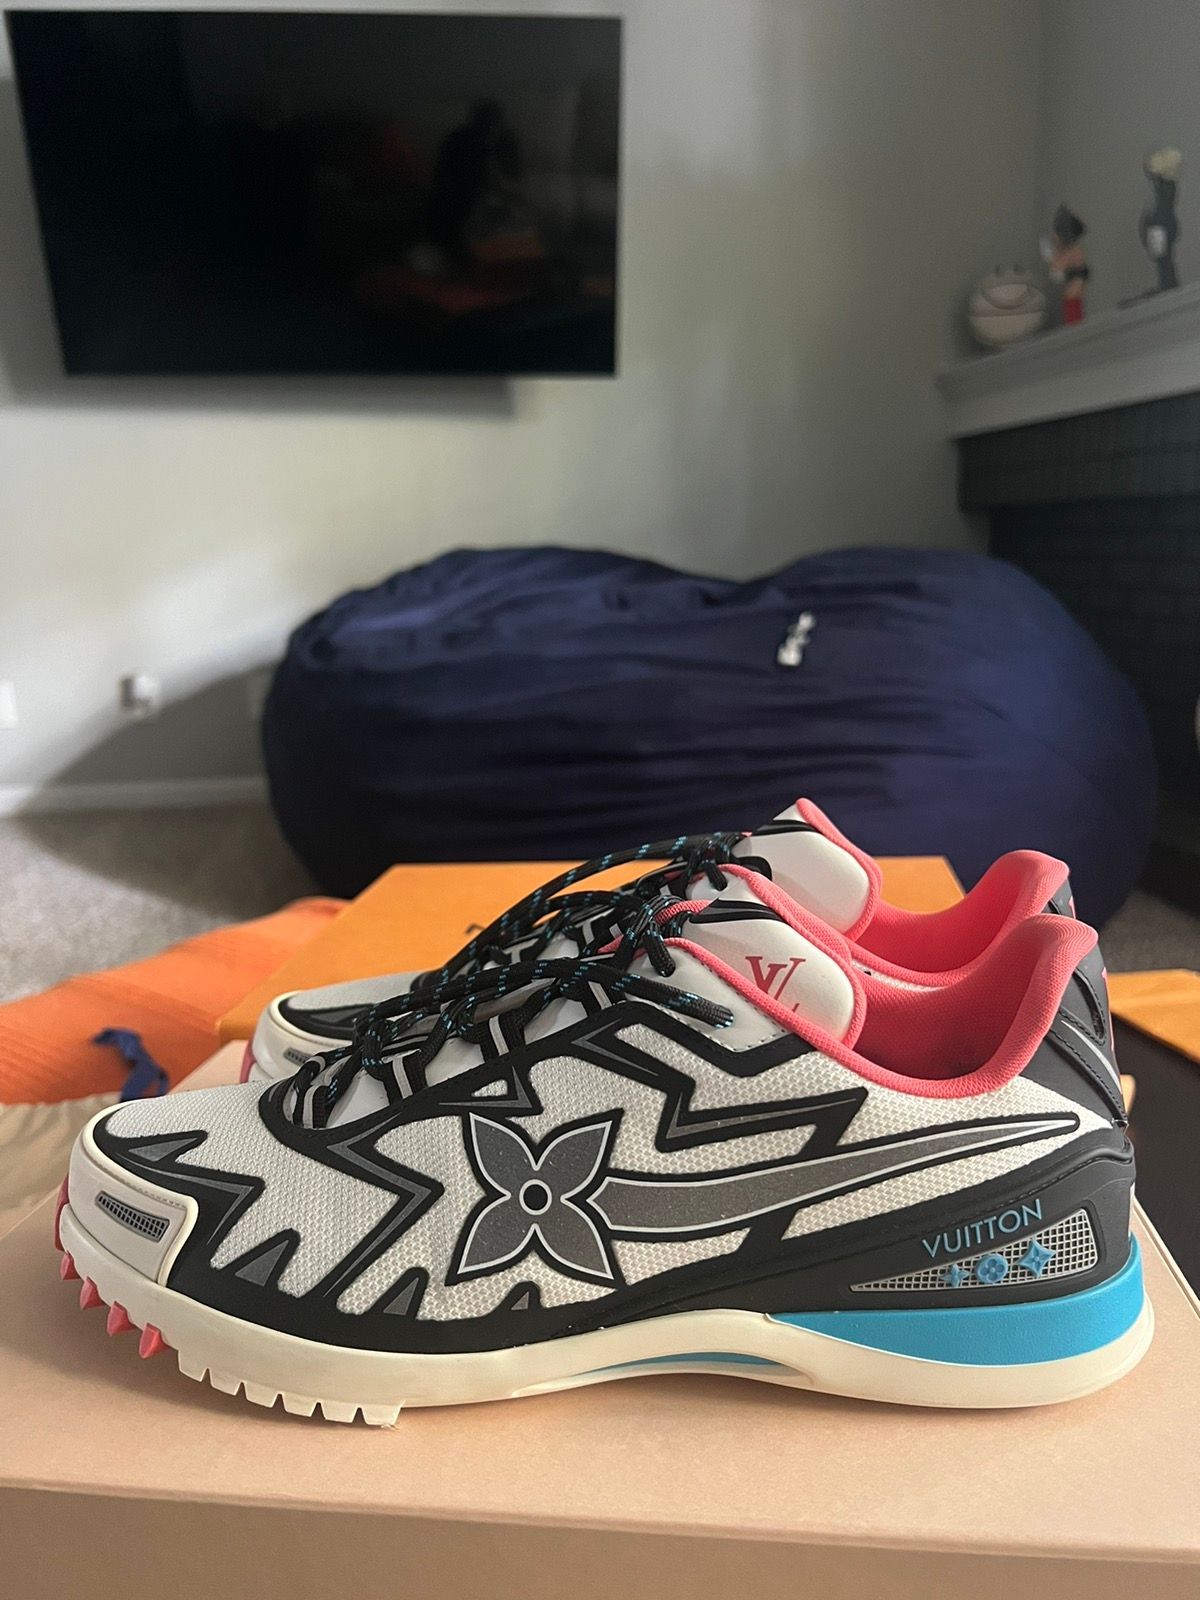 How to buy Virgil Abloh's SS22 Louis Vuitton Runner Tactic Trainer